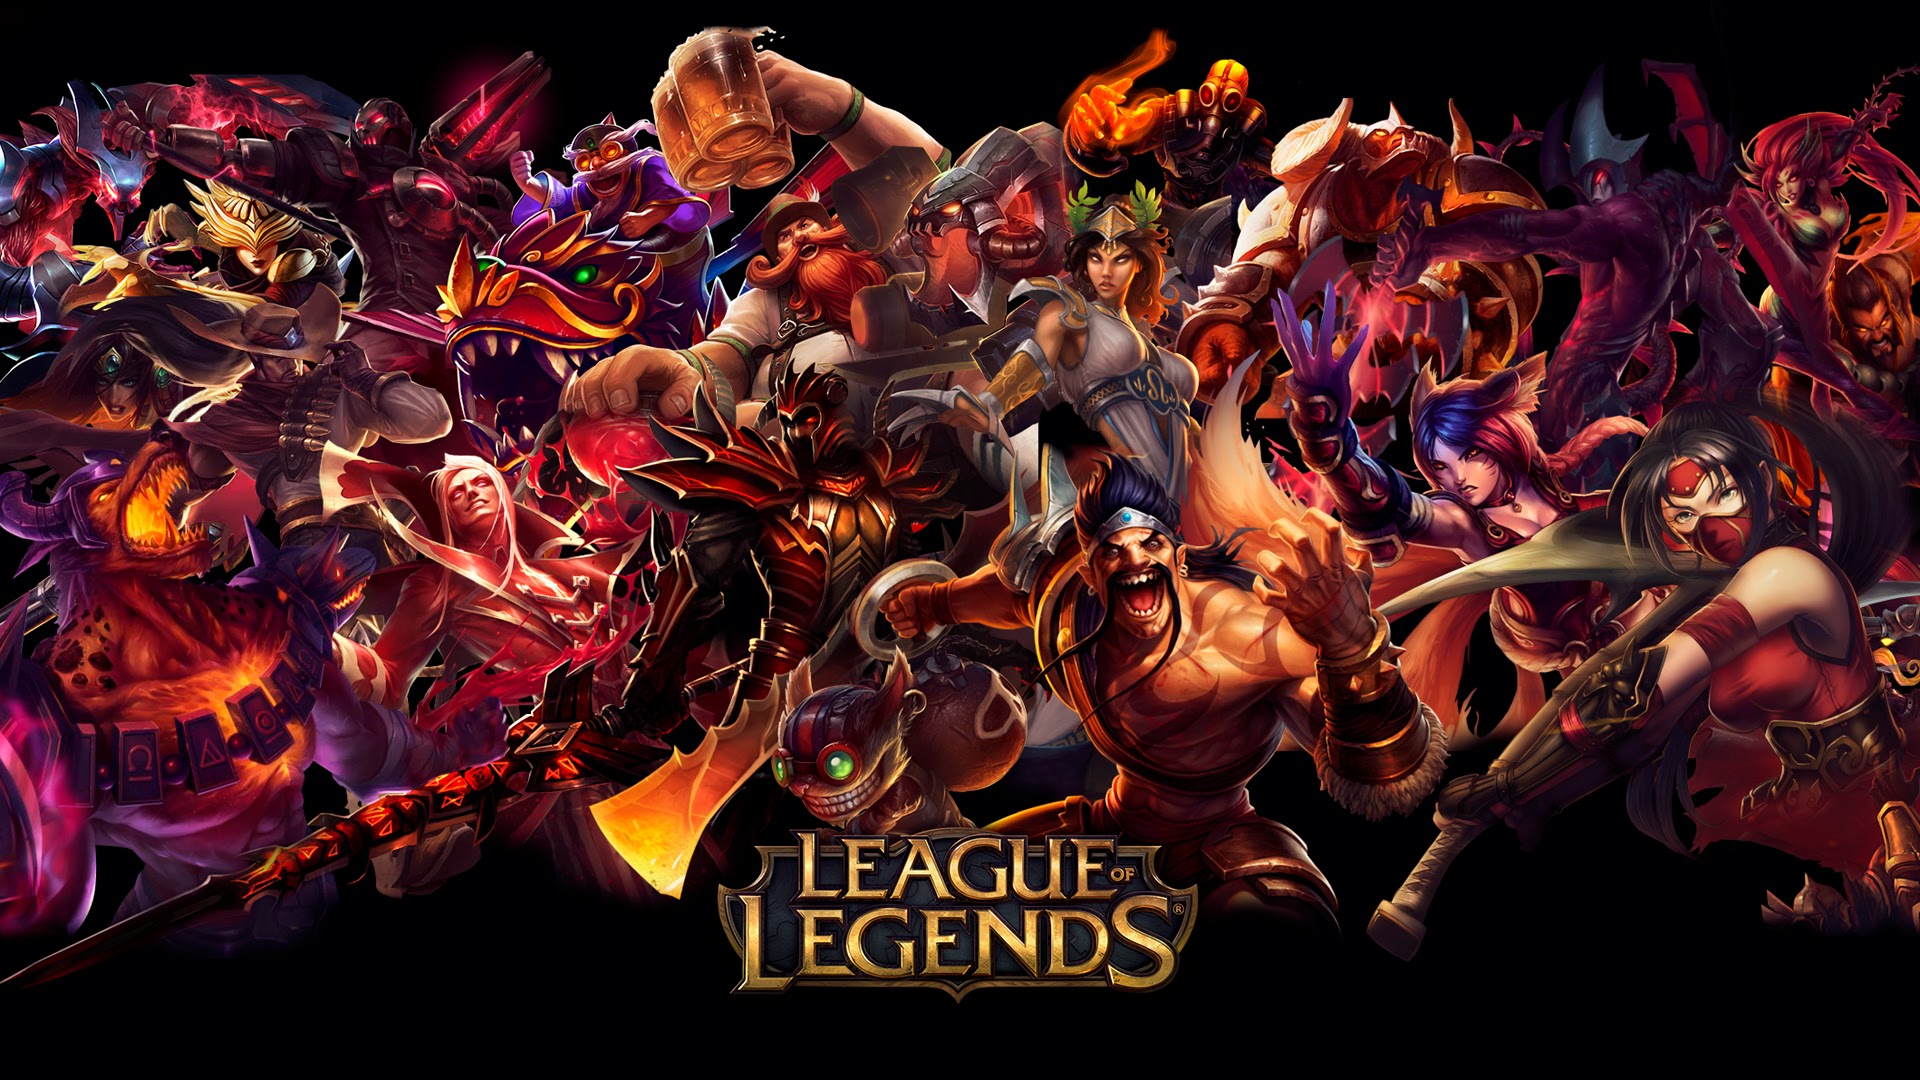 league of legends wallpaper hd 1920x1080,games,font,graphic design,fictional character,animation